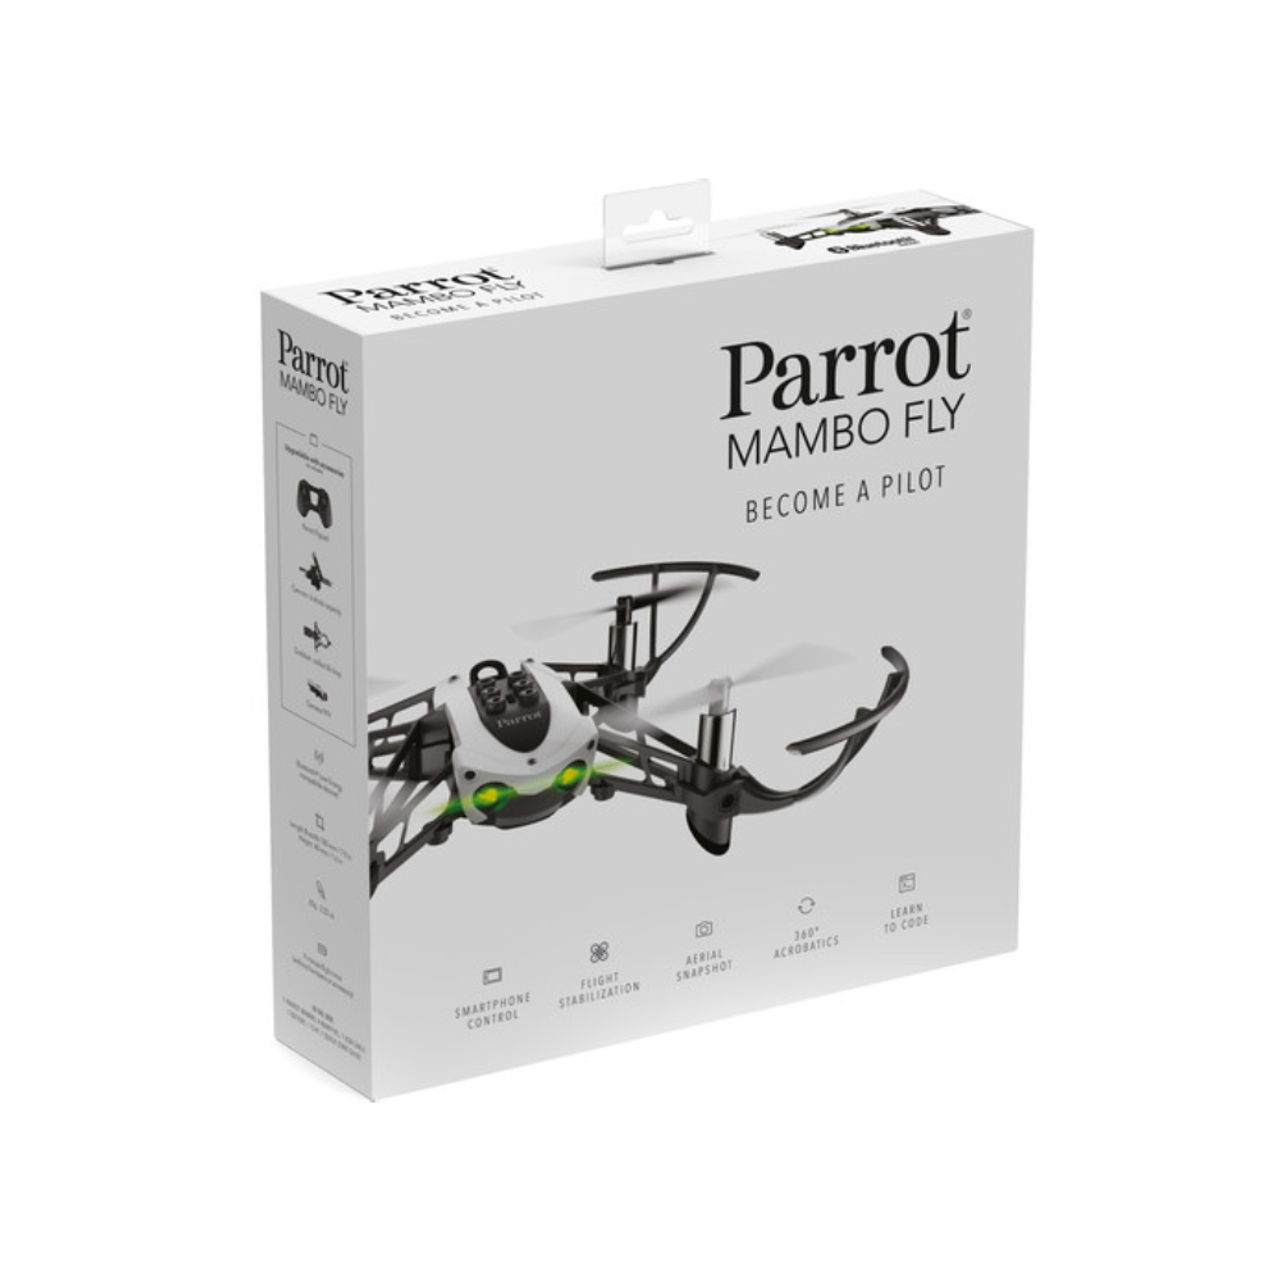 Parrot Mambo Fly Mini Quadcopter Drone, PF727008AA